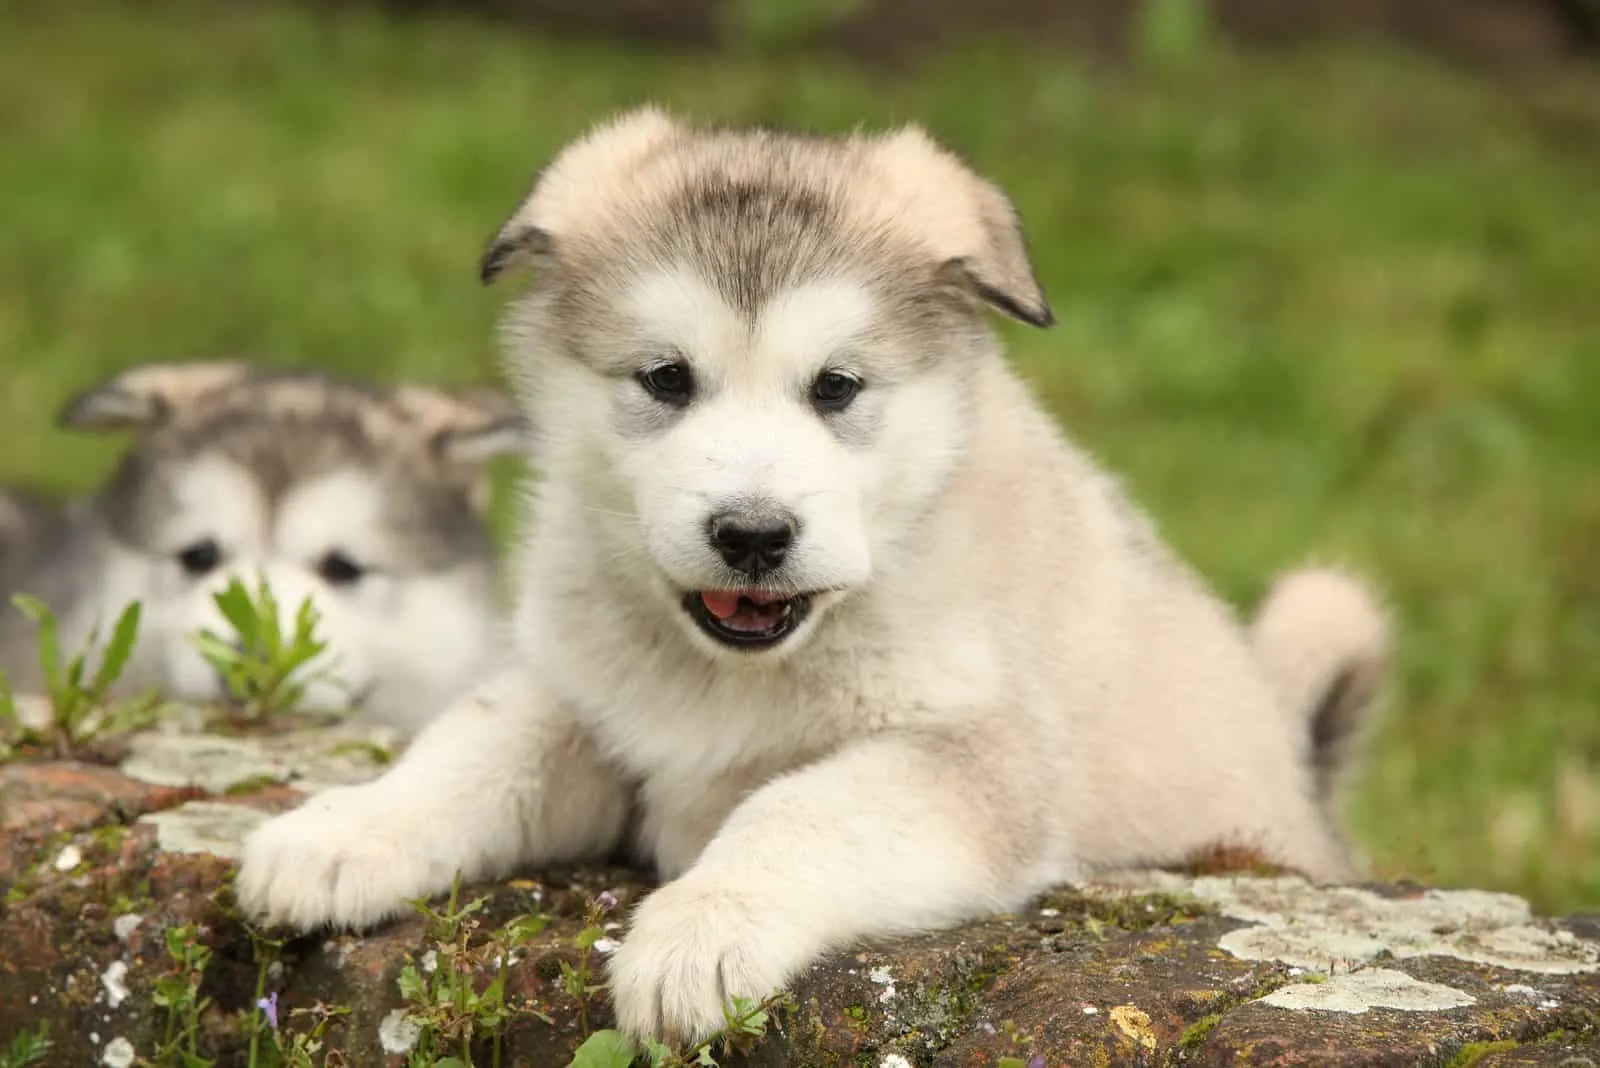 Alaskan Malamute puppy climbs while it looking at you